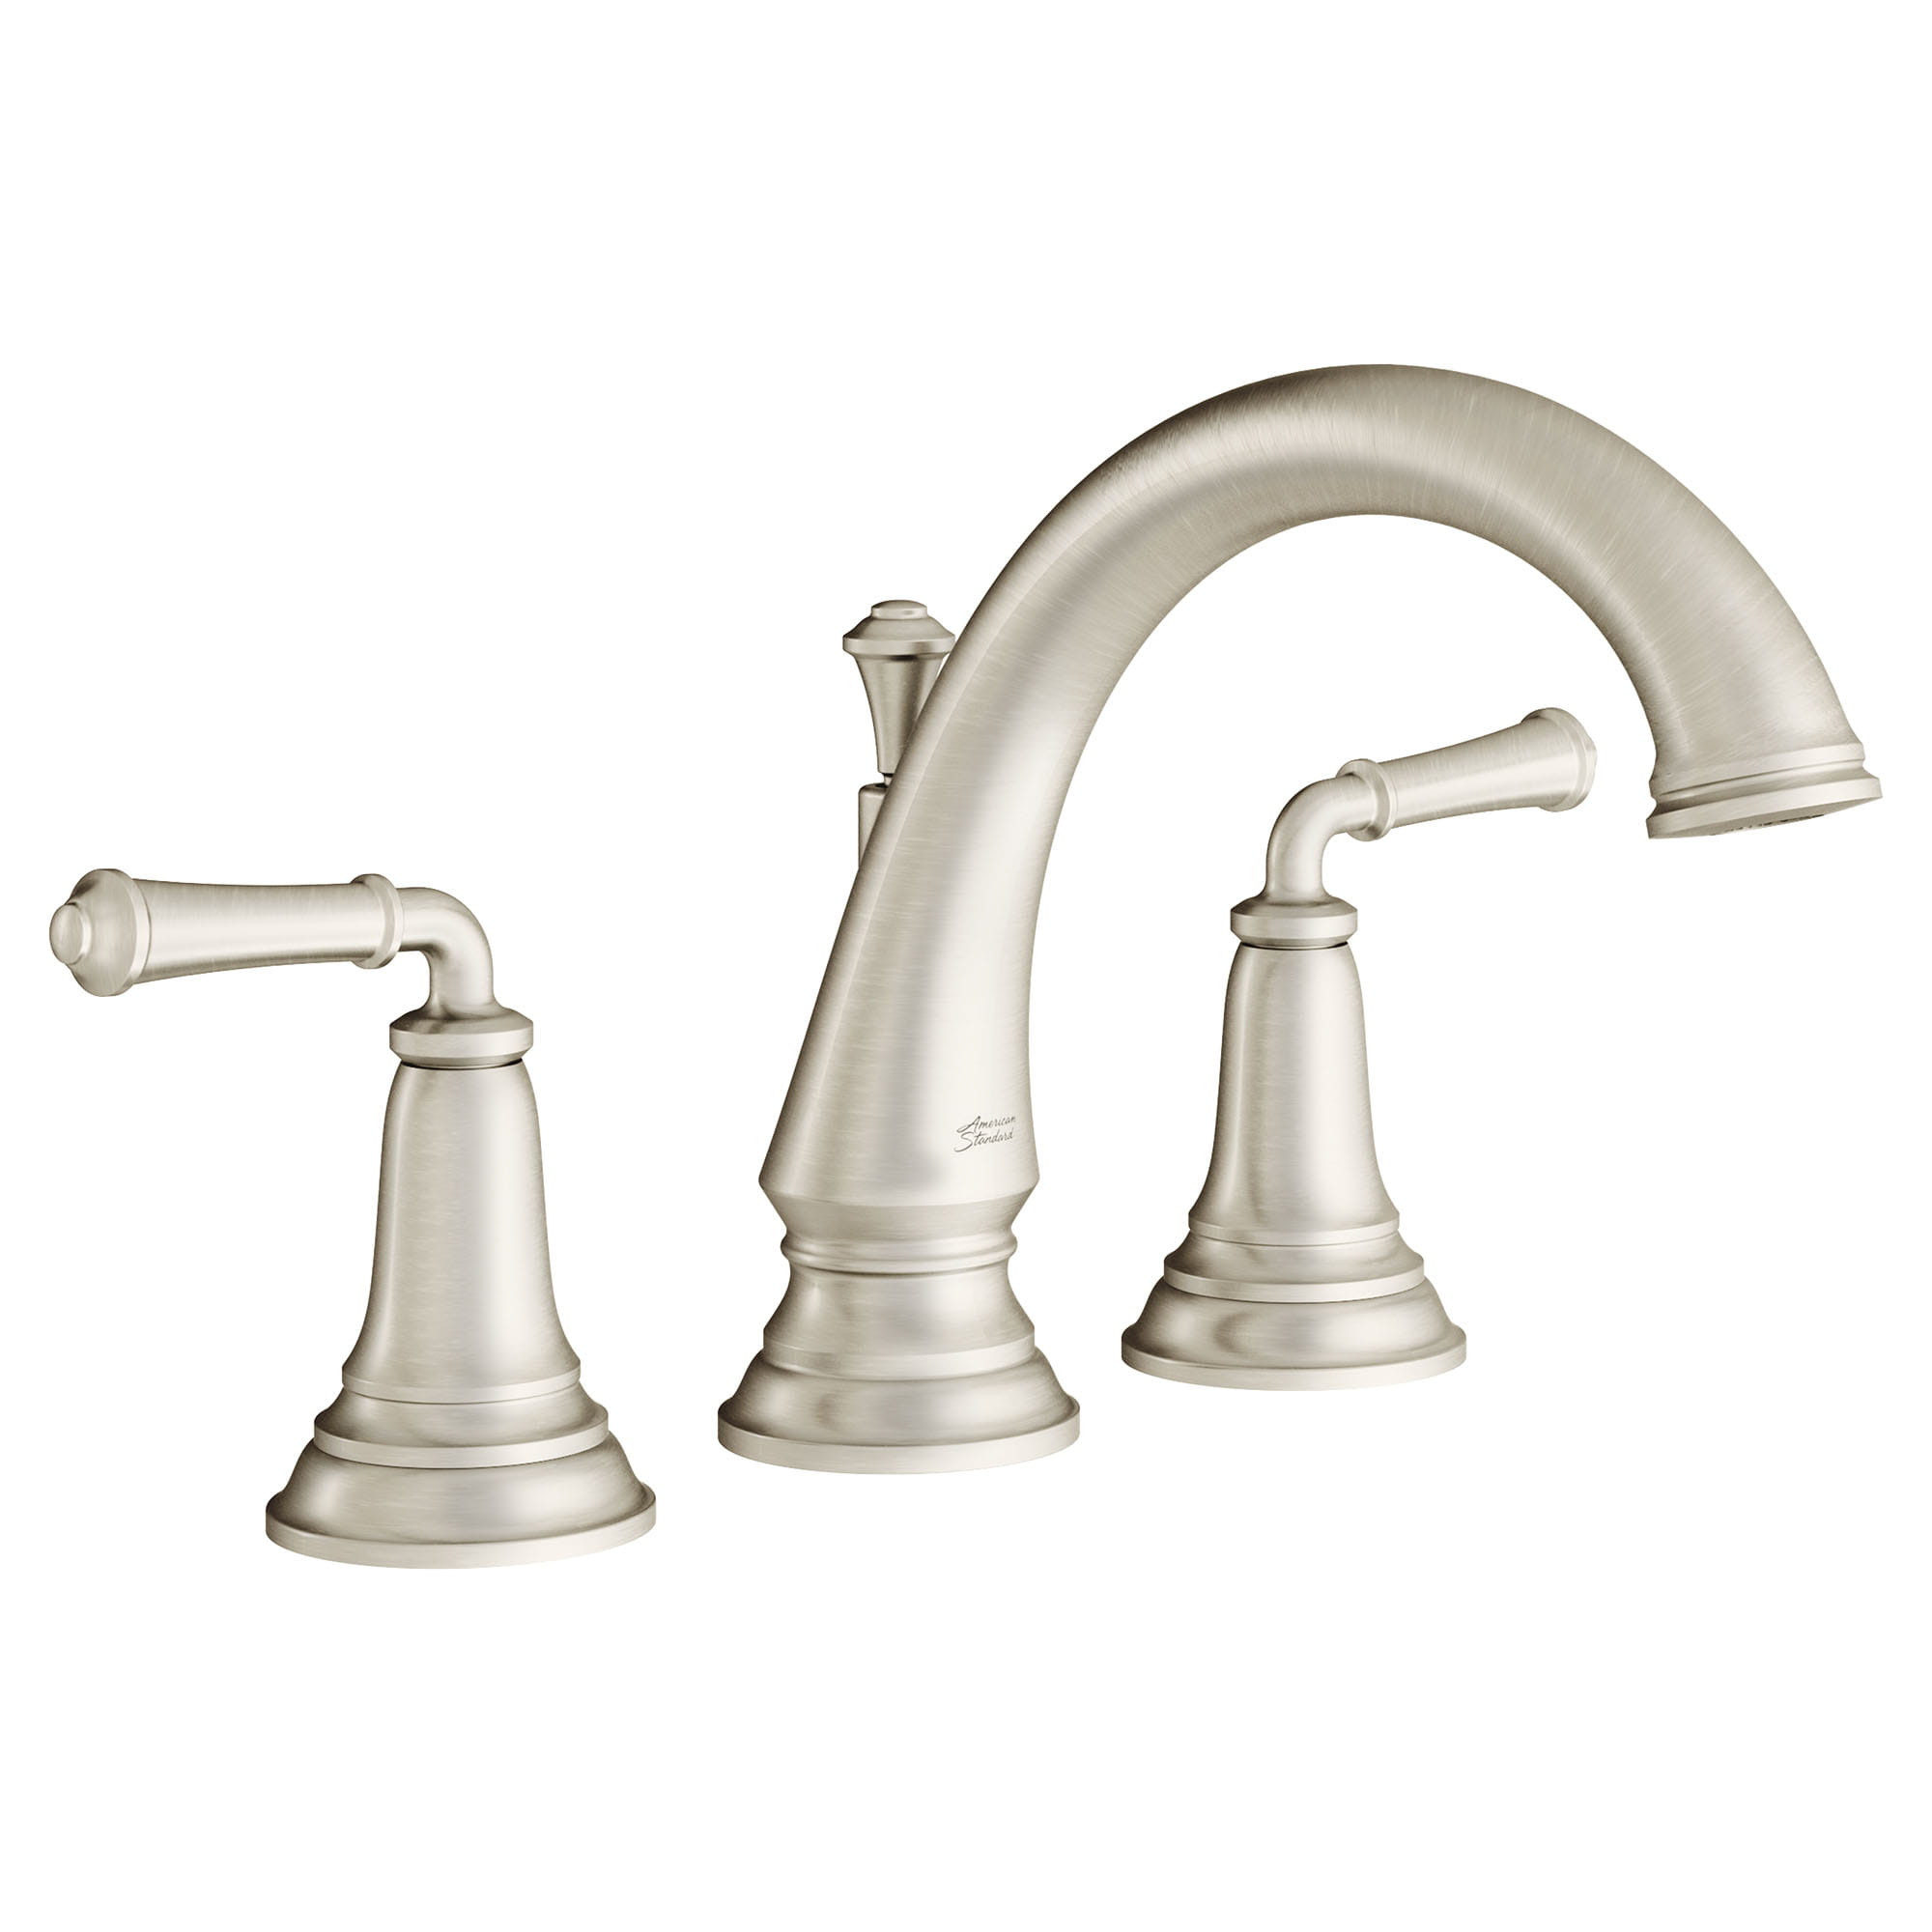 Delancey Bathtub Faucet With Lever Handles for Flash Rough In Valve BRUSHED NICKEL